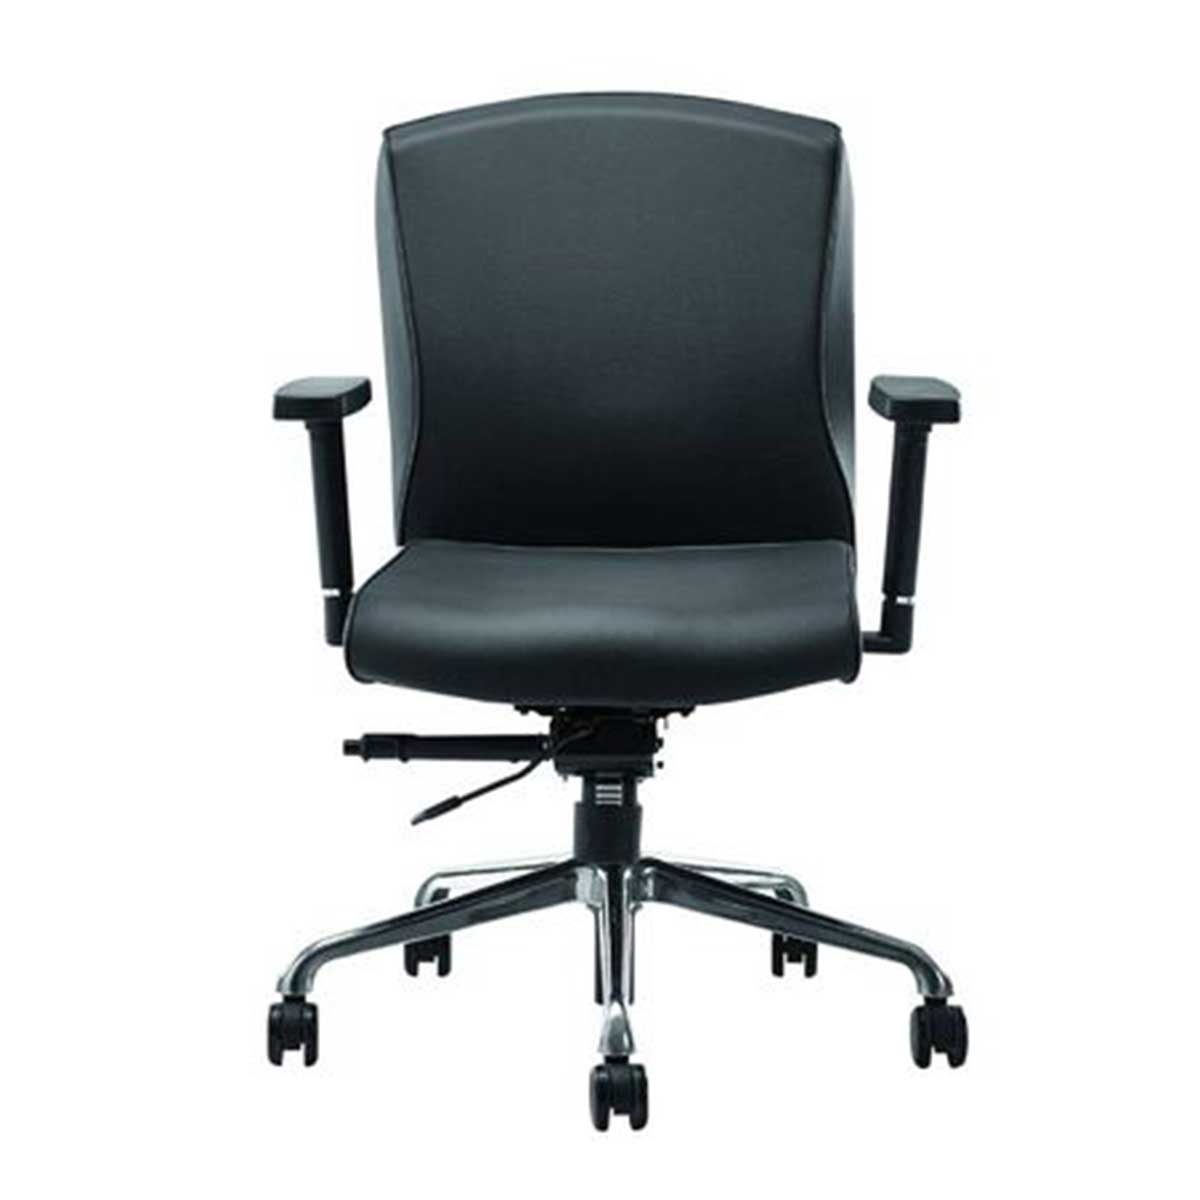 Low Back Office Chair Manufacturers, Suppliers in Aiims